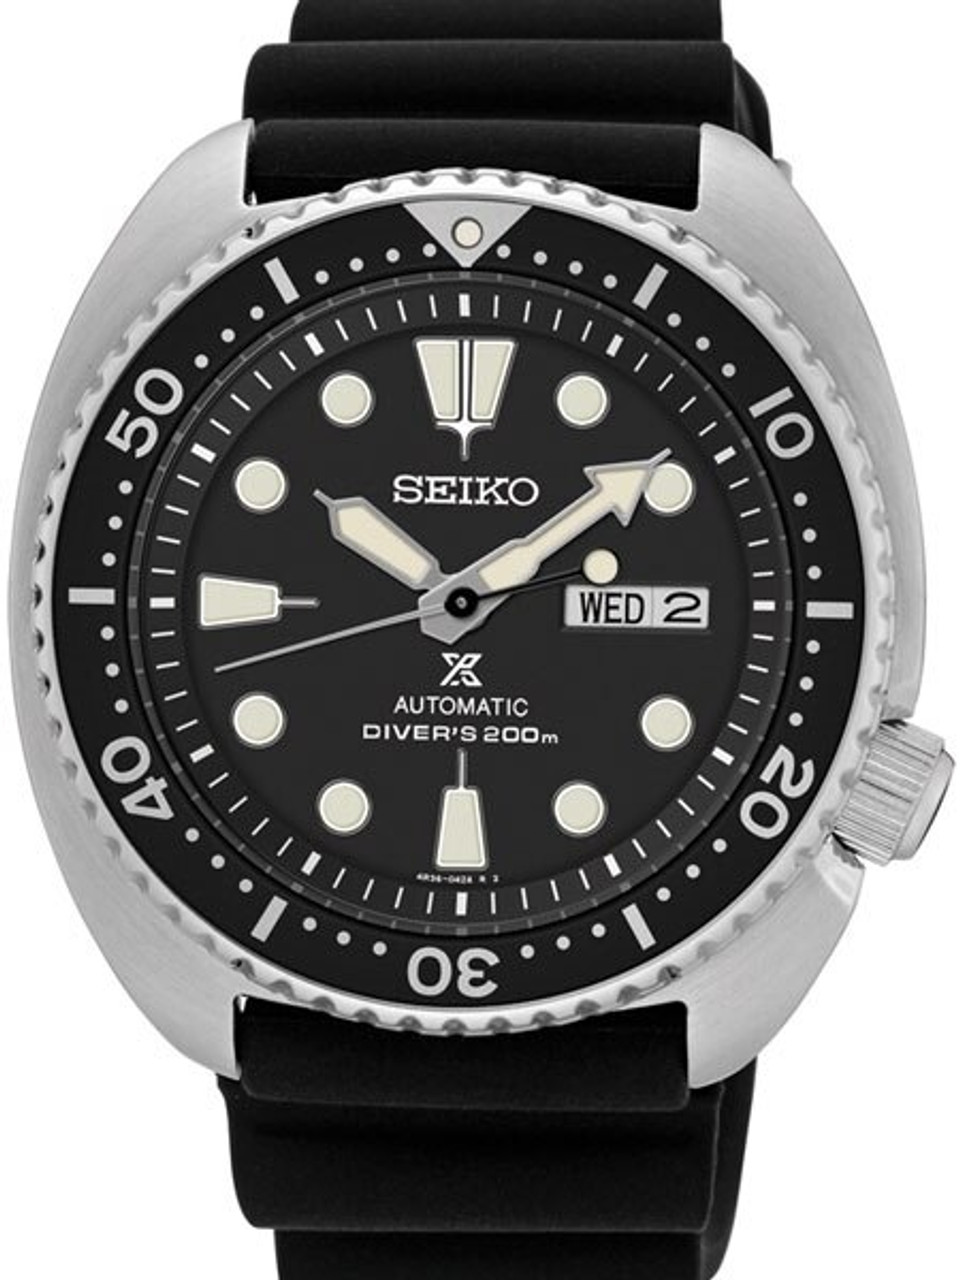 Custom Modded Seiko Automatic Dive Watch SRP777